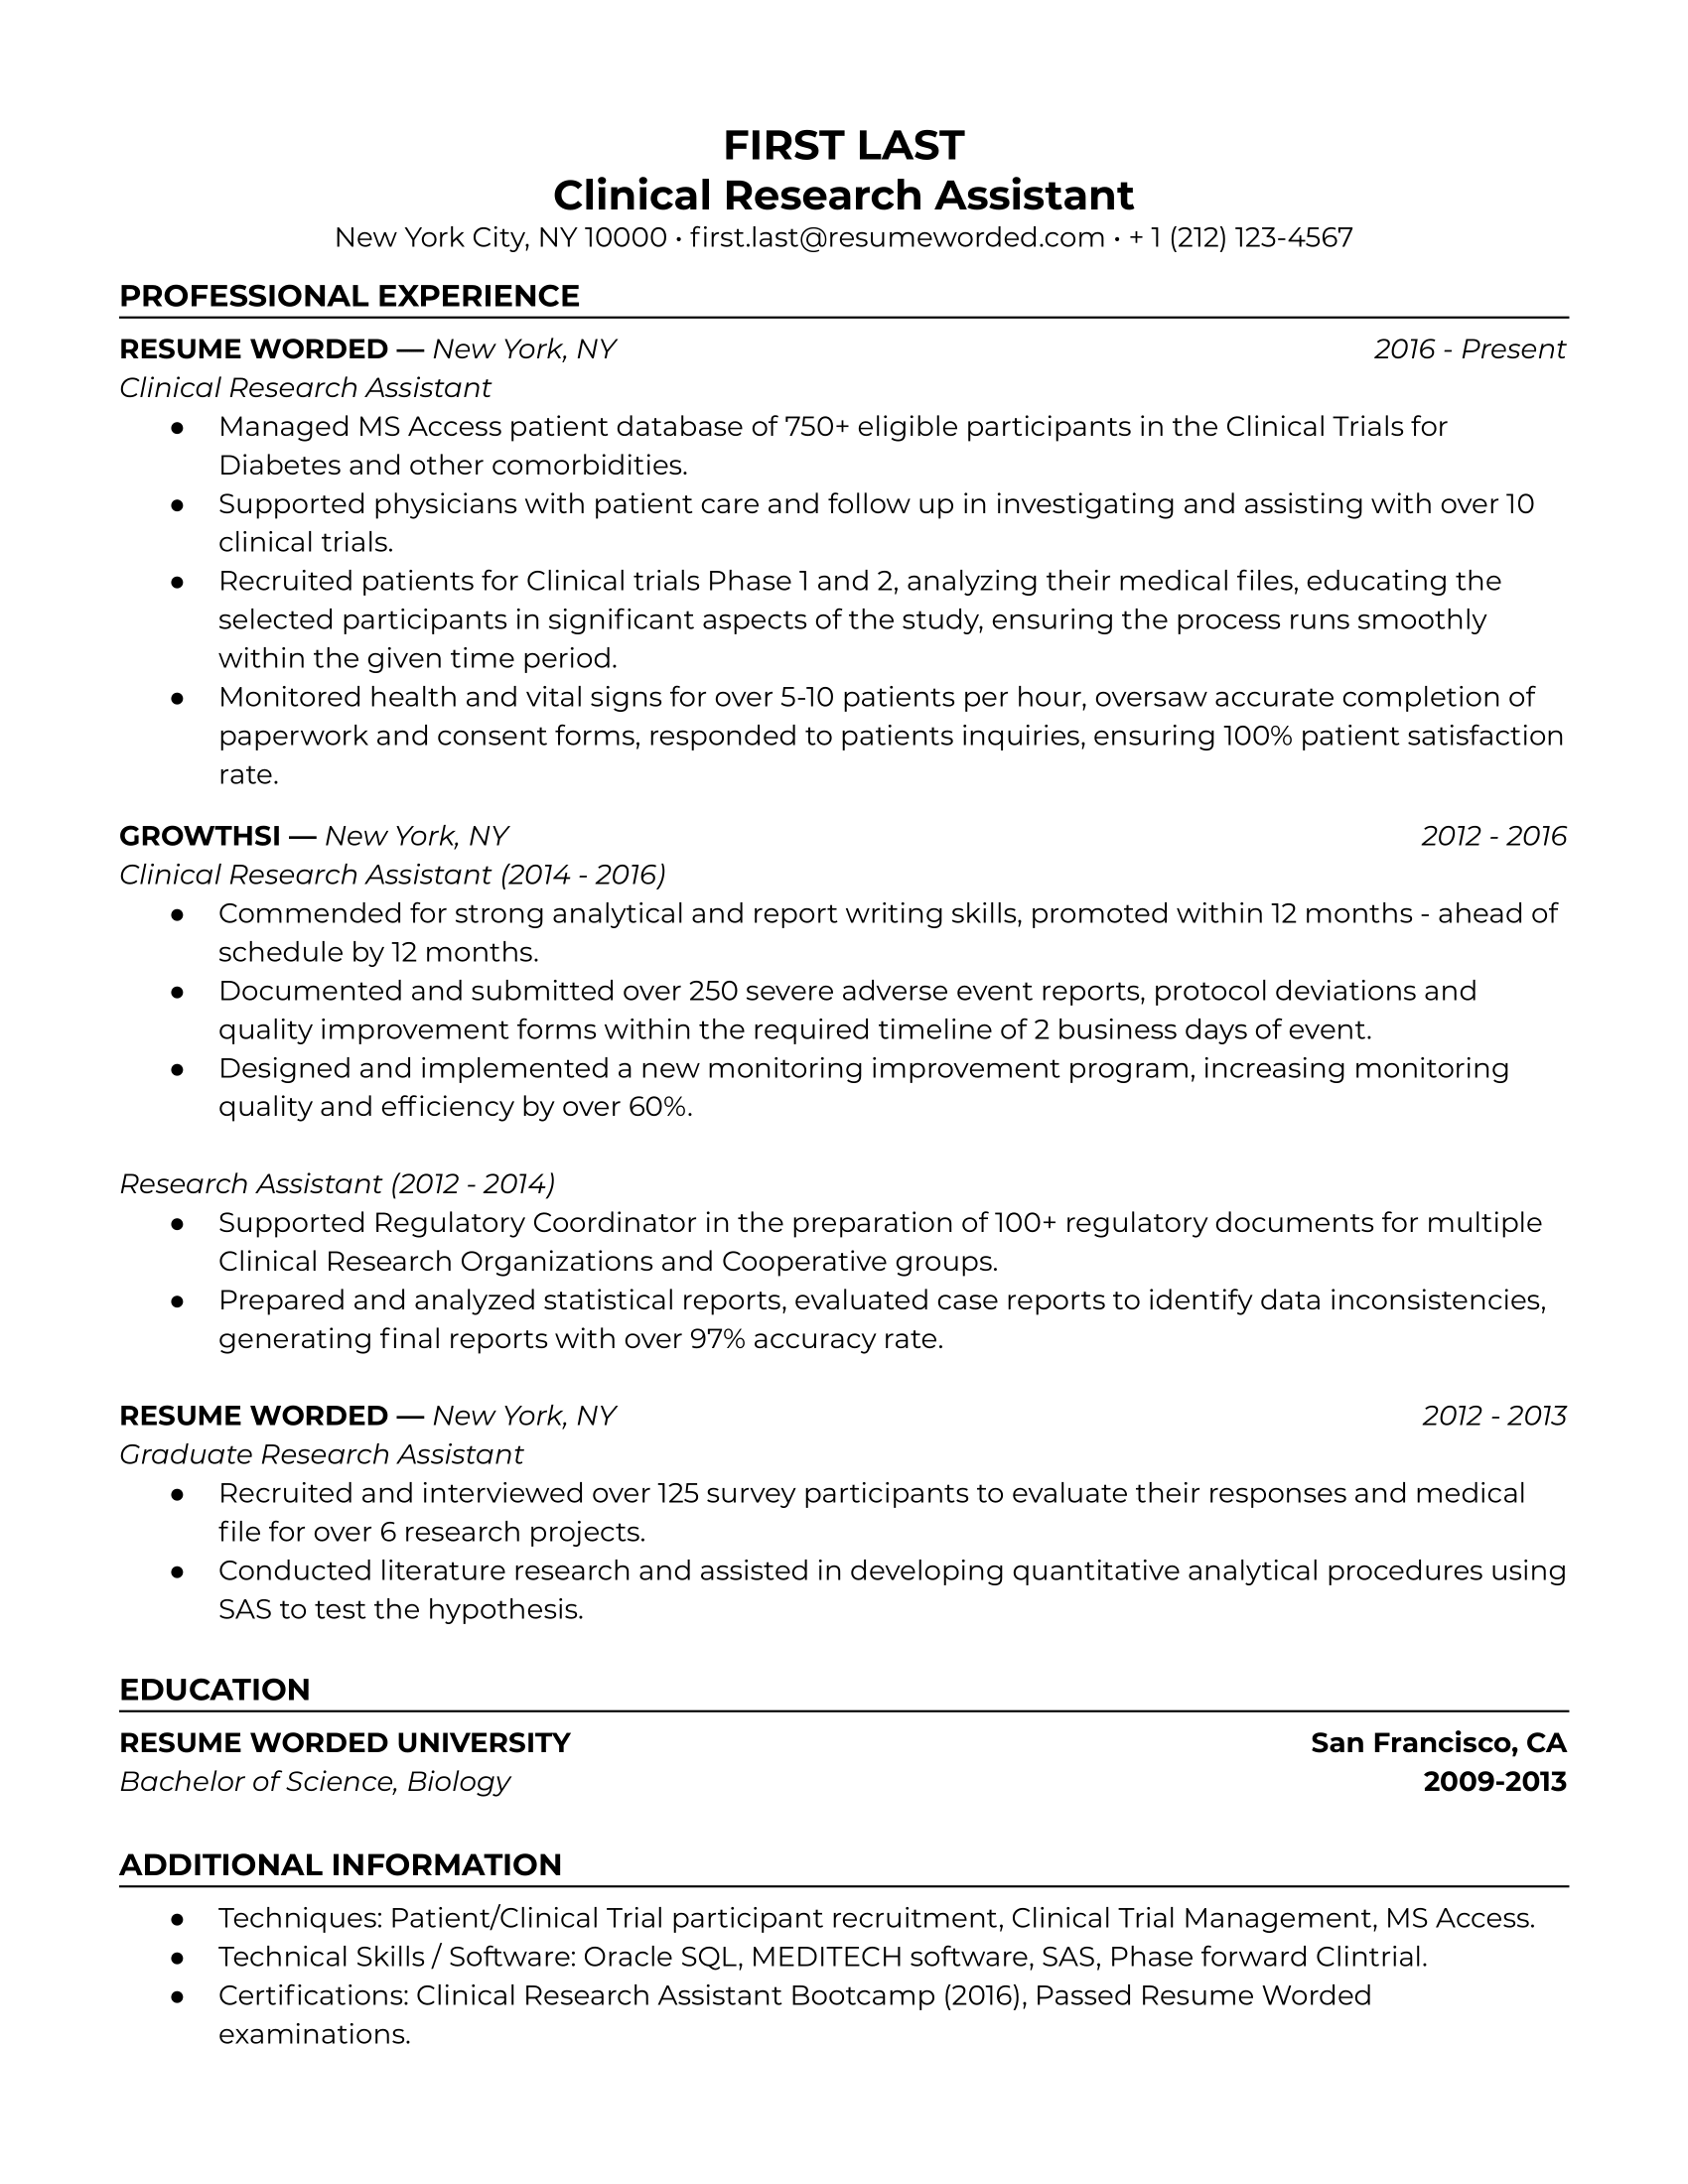 CV of a Clinical Research Assistant showcasing relevant skills and experiences.